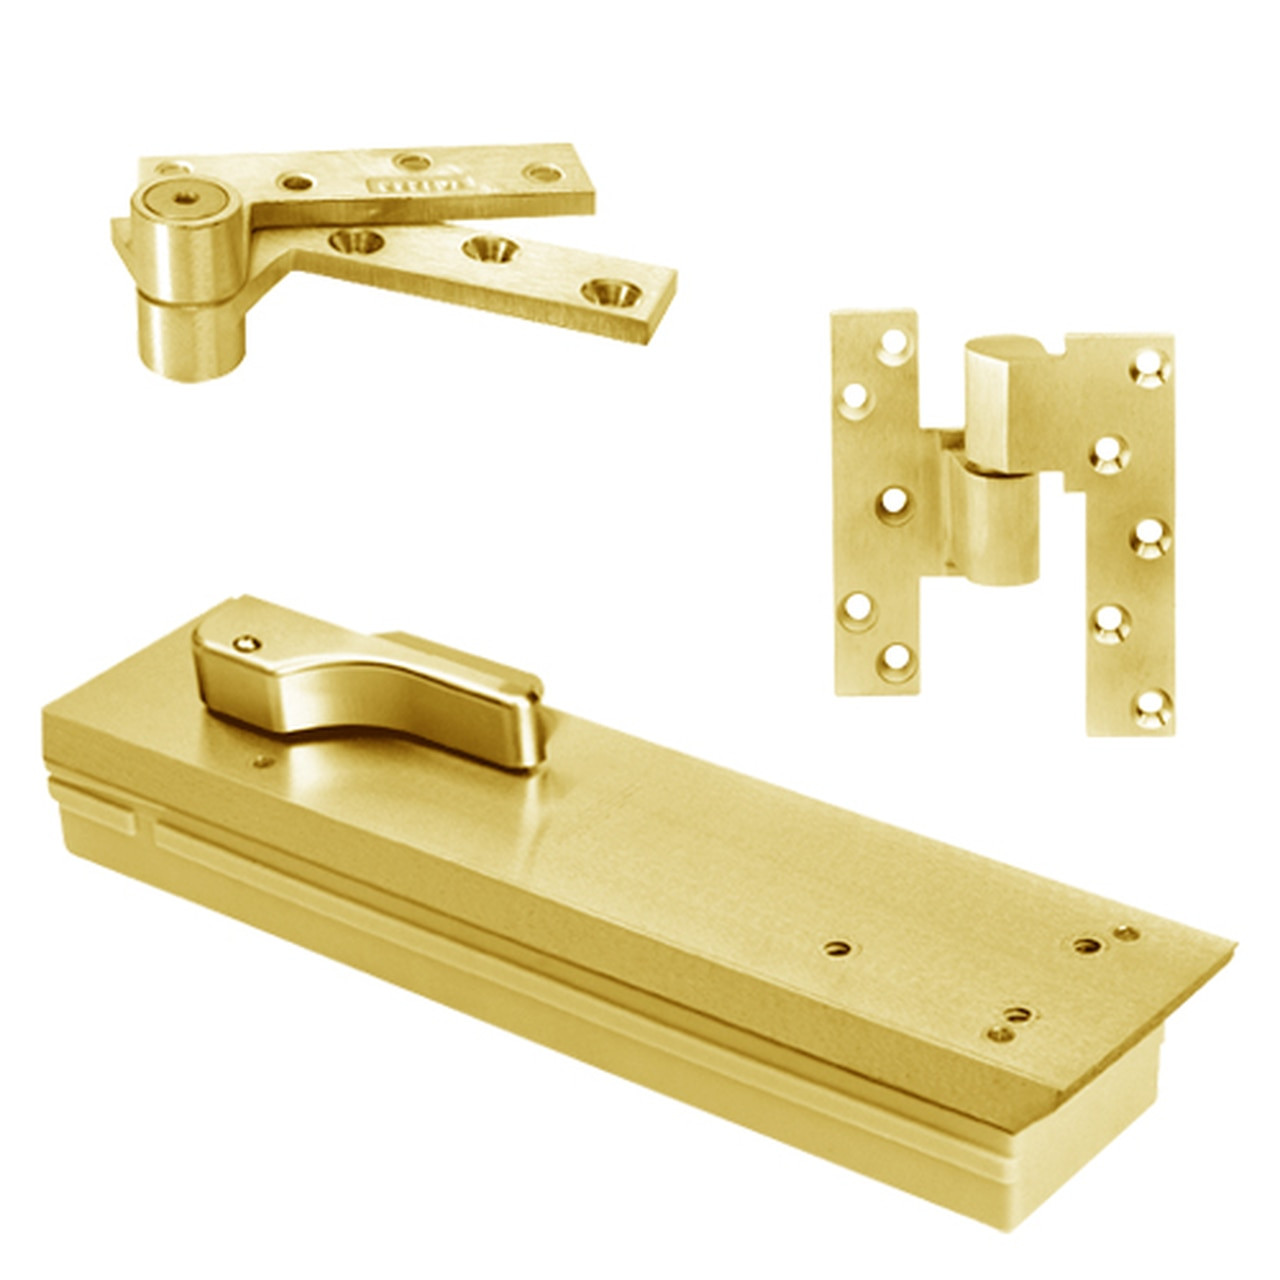 FQ5105NBC-LFP-LTP-LH-605 Rixson Q51 Series Fire Rated 3/4" Offset Hung Shallow Depth Floor Closers in Bright Brass Finish